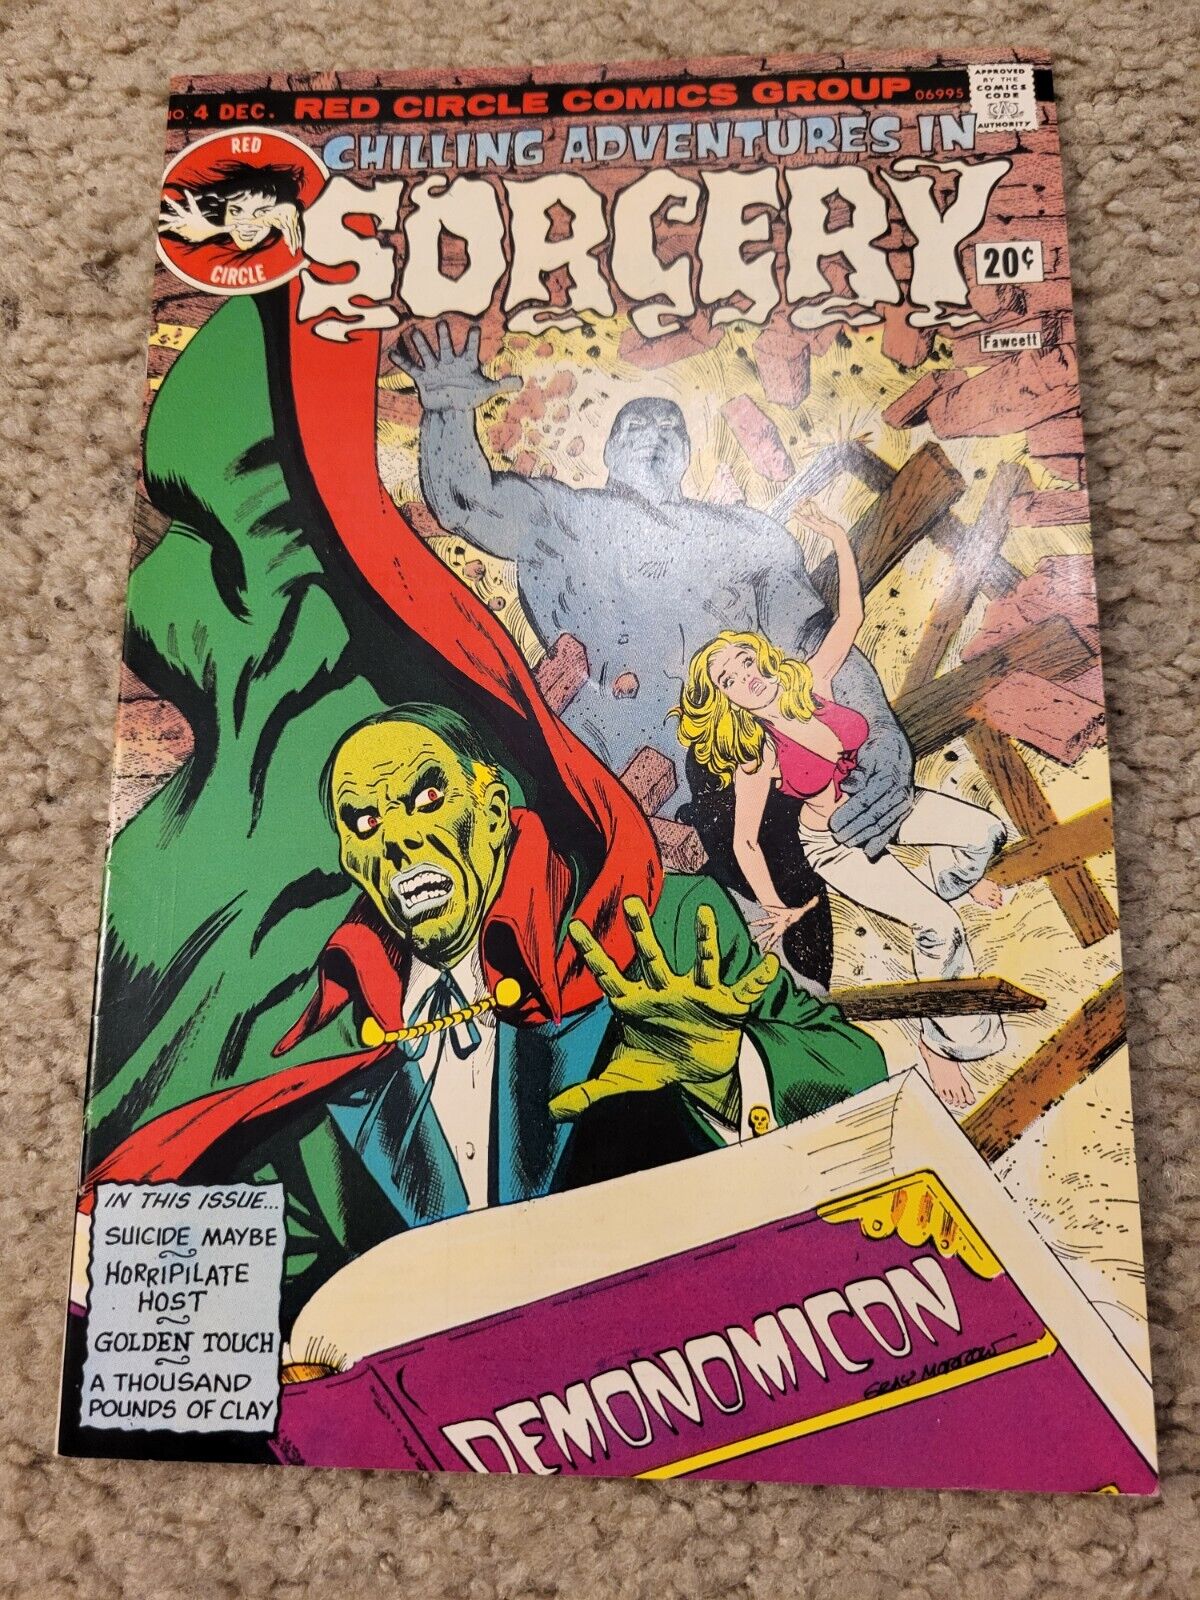 Chilling Adventures in Sorcery 4 RED CIRCLE COMICS GROUP lot 1973